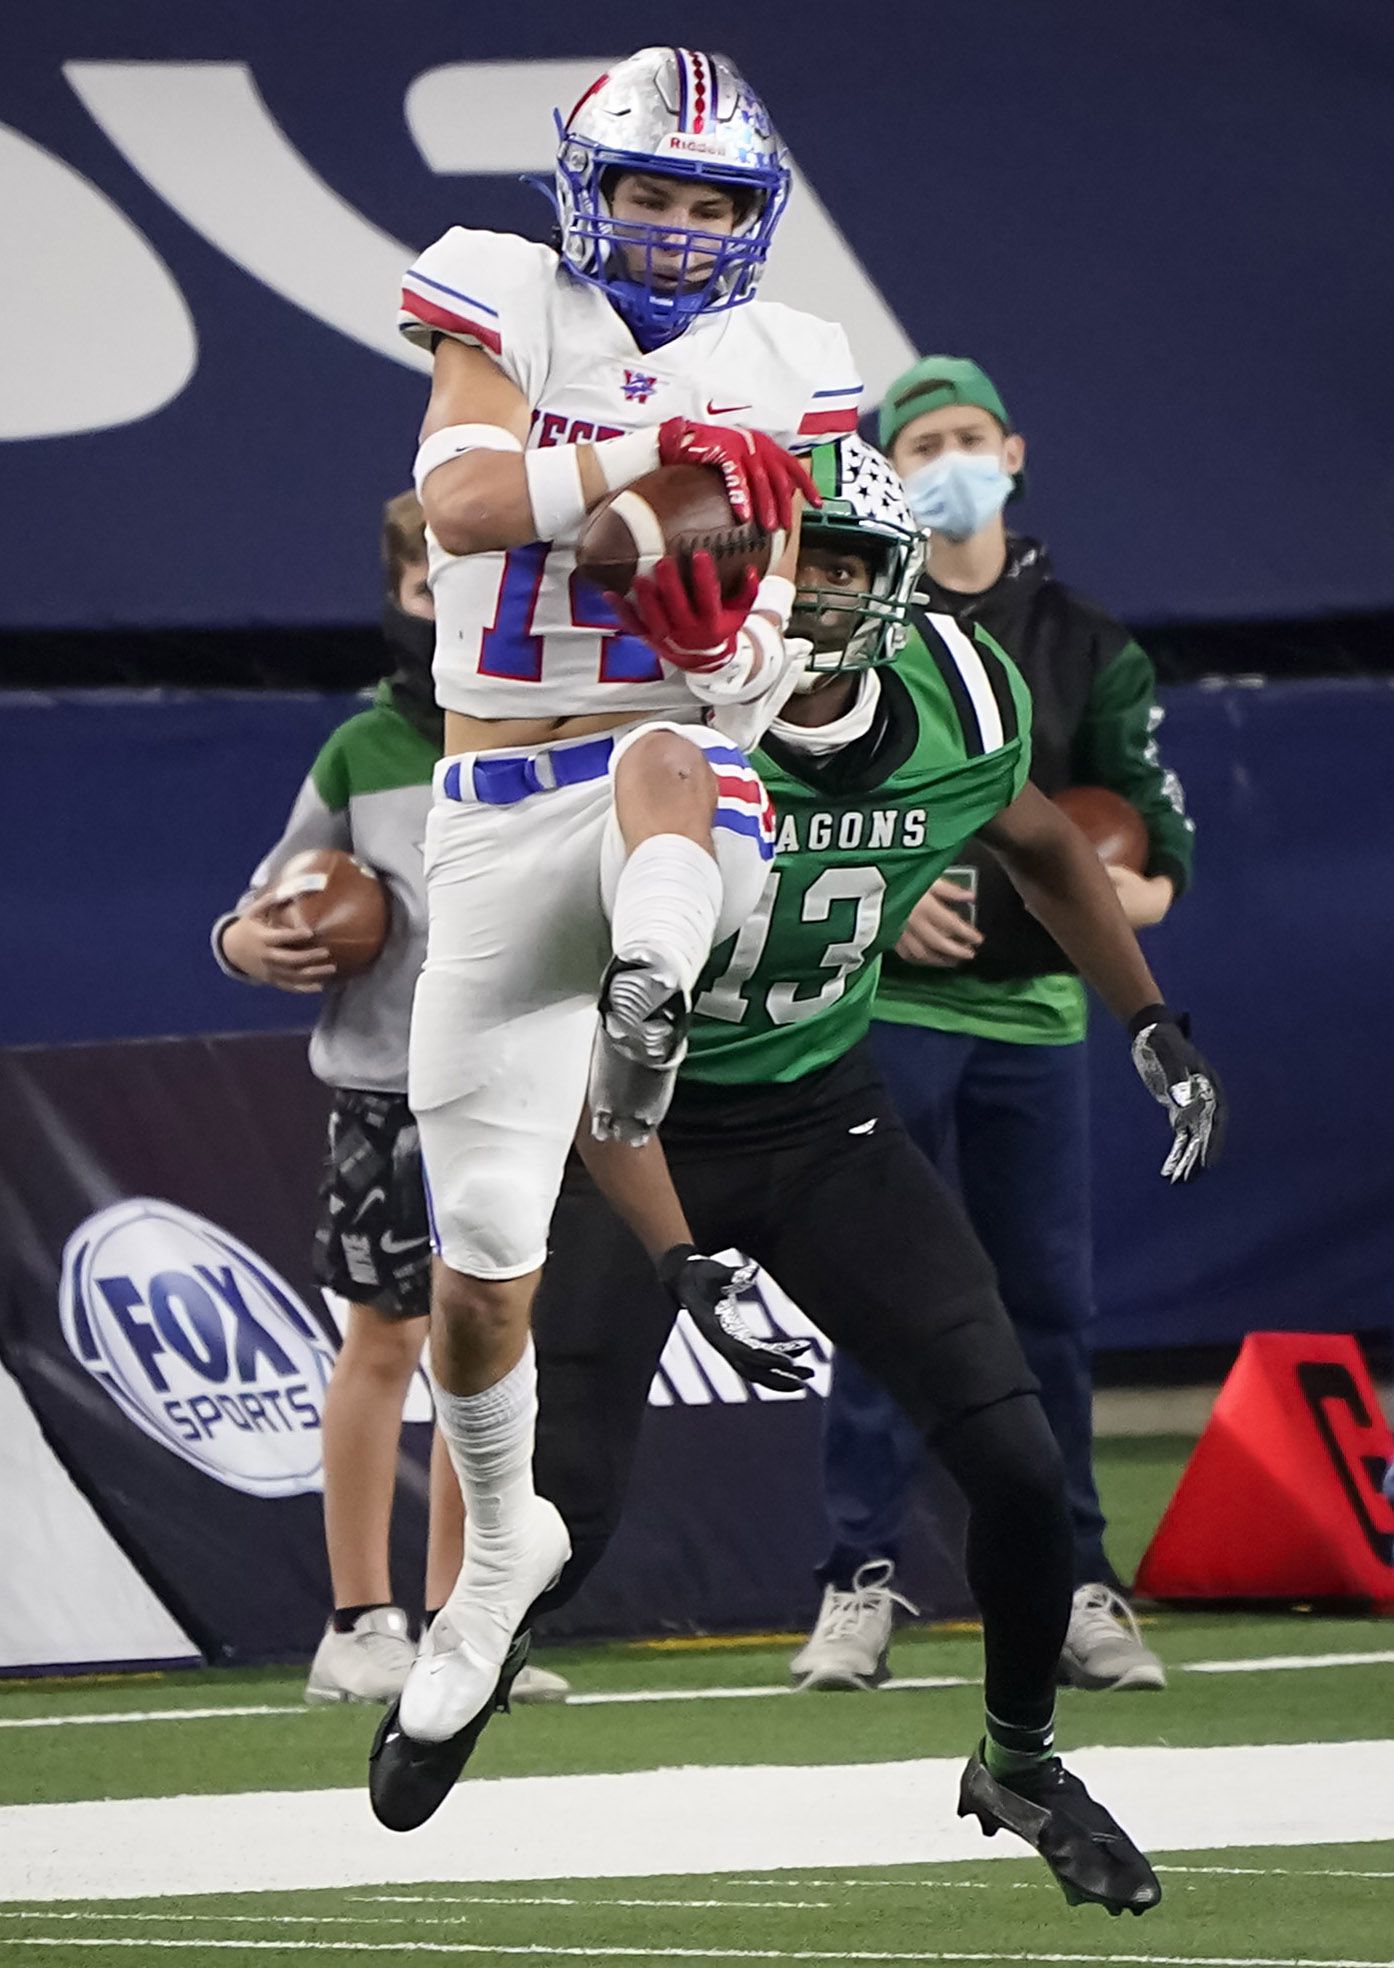 Austin Westlake defensive back Michael Taaffe (14) intercepts a pass intended for Southlake Carroll tight end RJ Maryland (13) during the second quarter of the Class 6A Division I state football championship game at AT&T Stadium on Saturday, Jan. 16, 2021, in Arlington, Texas.